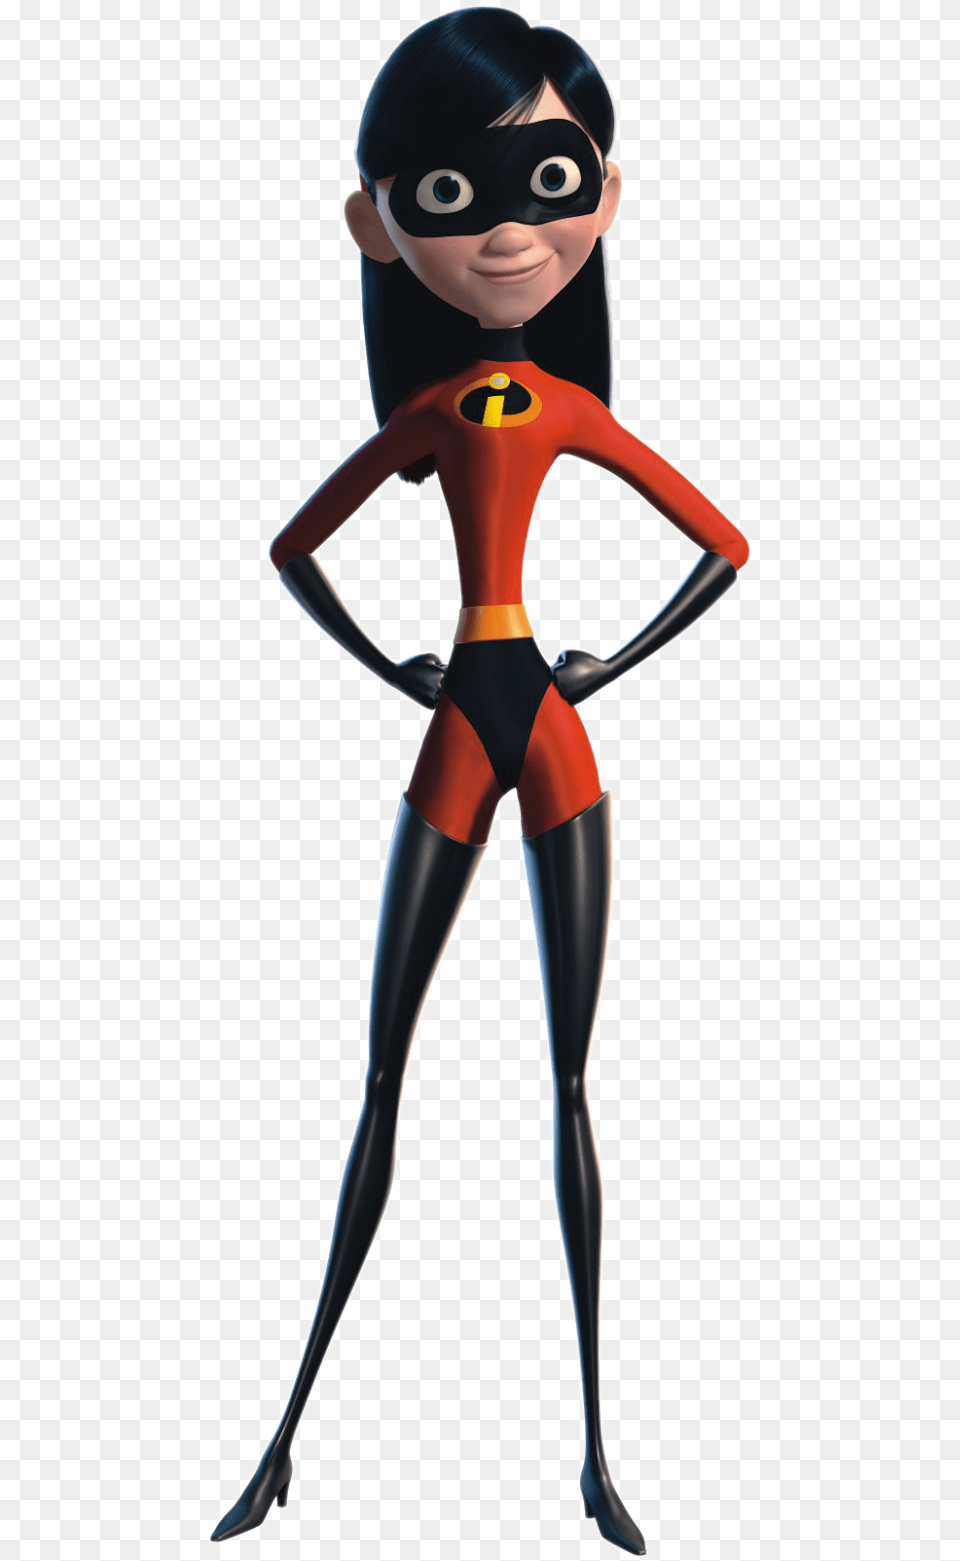 Pixar Movies Pixar Characters Disney Movies Disney Violet From The Incredibles, Adult, Female, Person, Woman Png Image